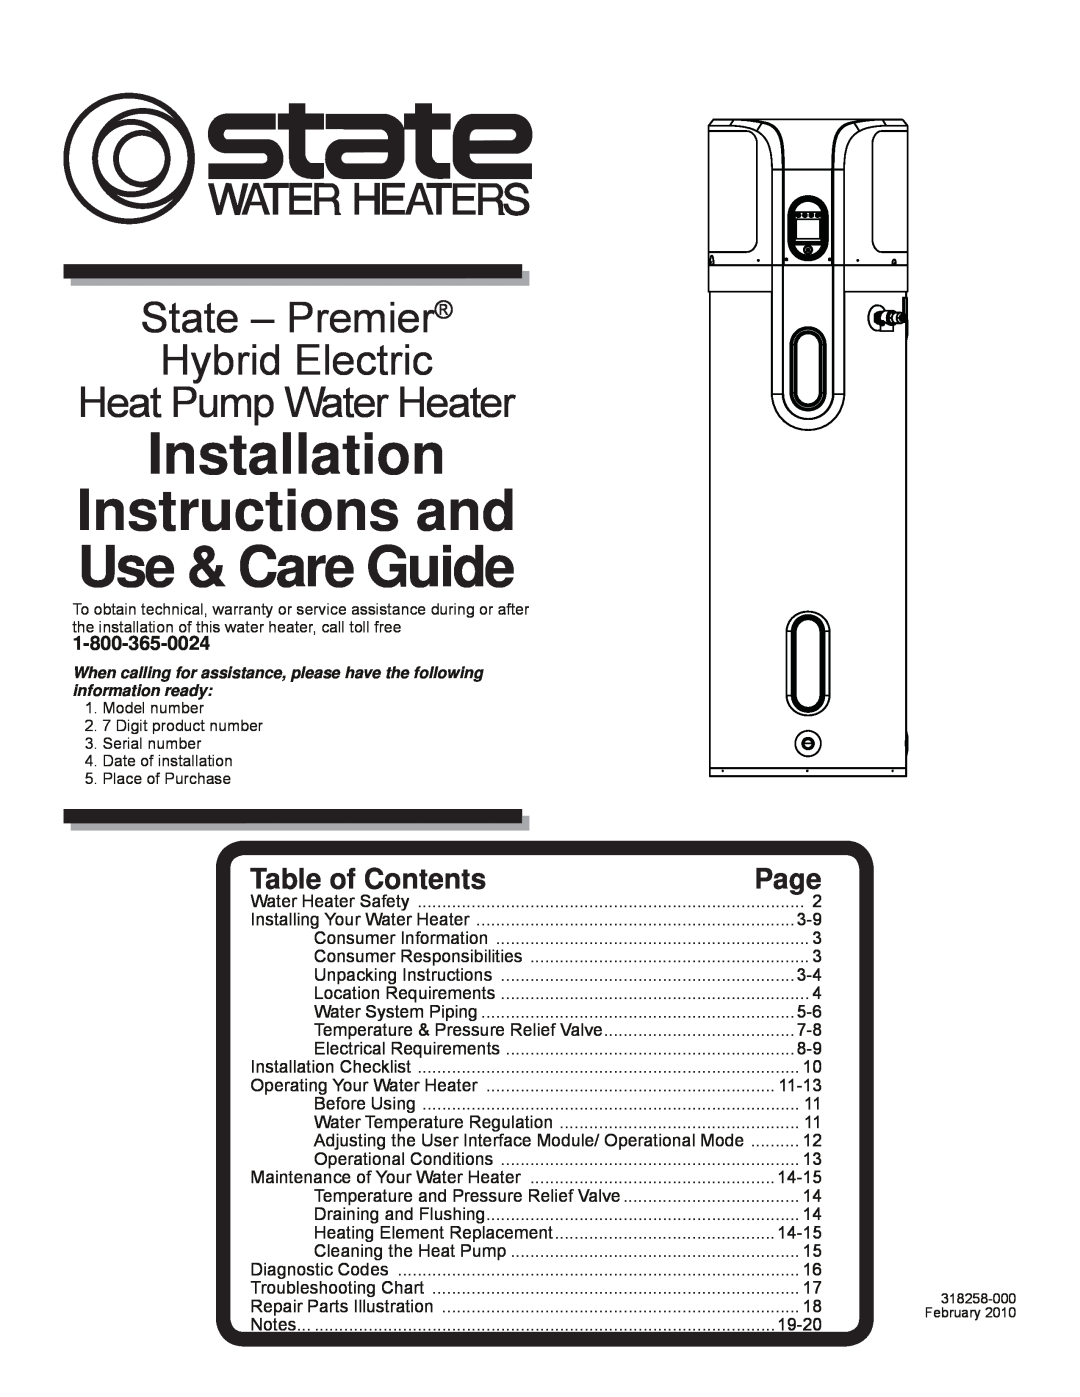 Univex 318258-000 installation instructions Installation Instructions and Use & Care Guide, Heat Pump Water Heater, Page 